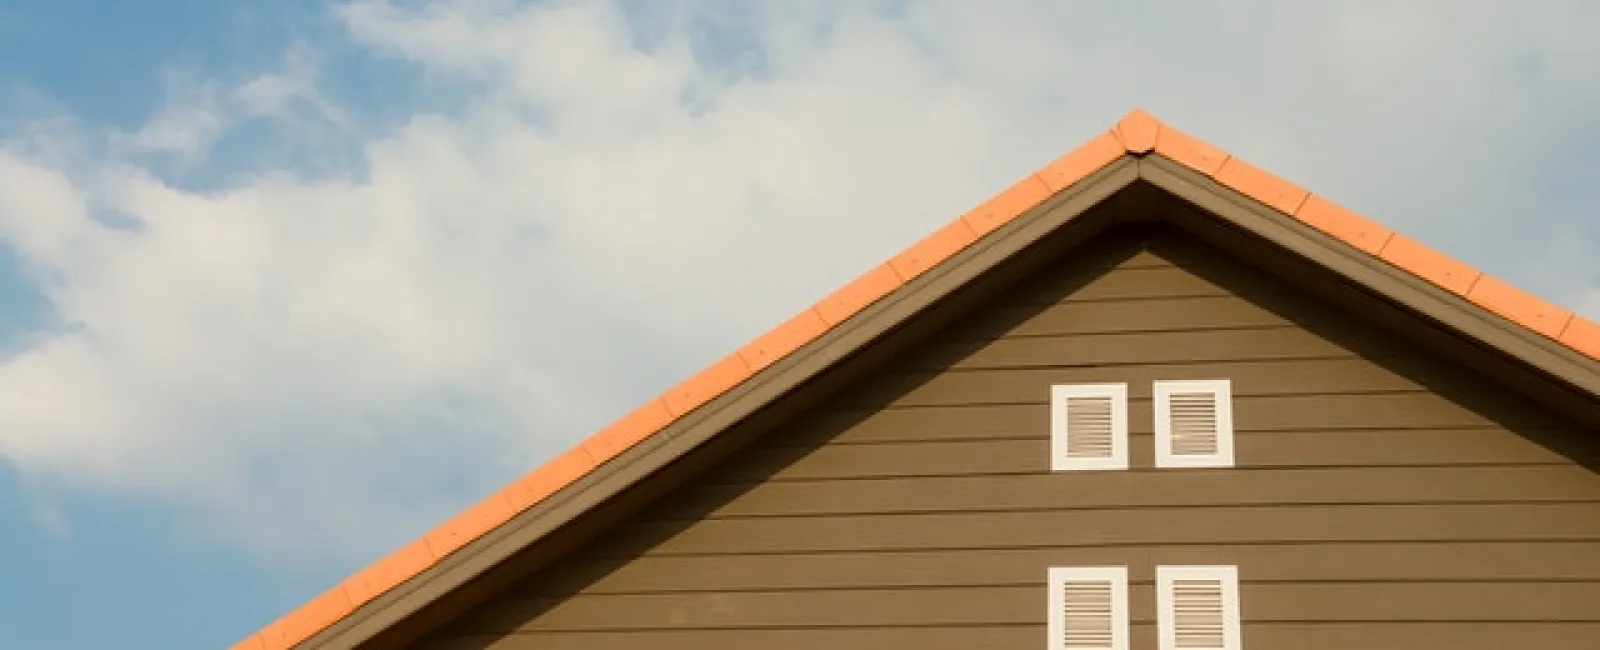 Why a Metal Roof Is an Excellent Choice for Homeowners